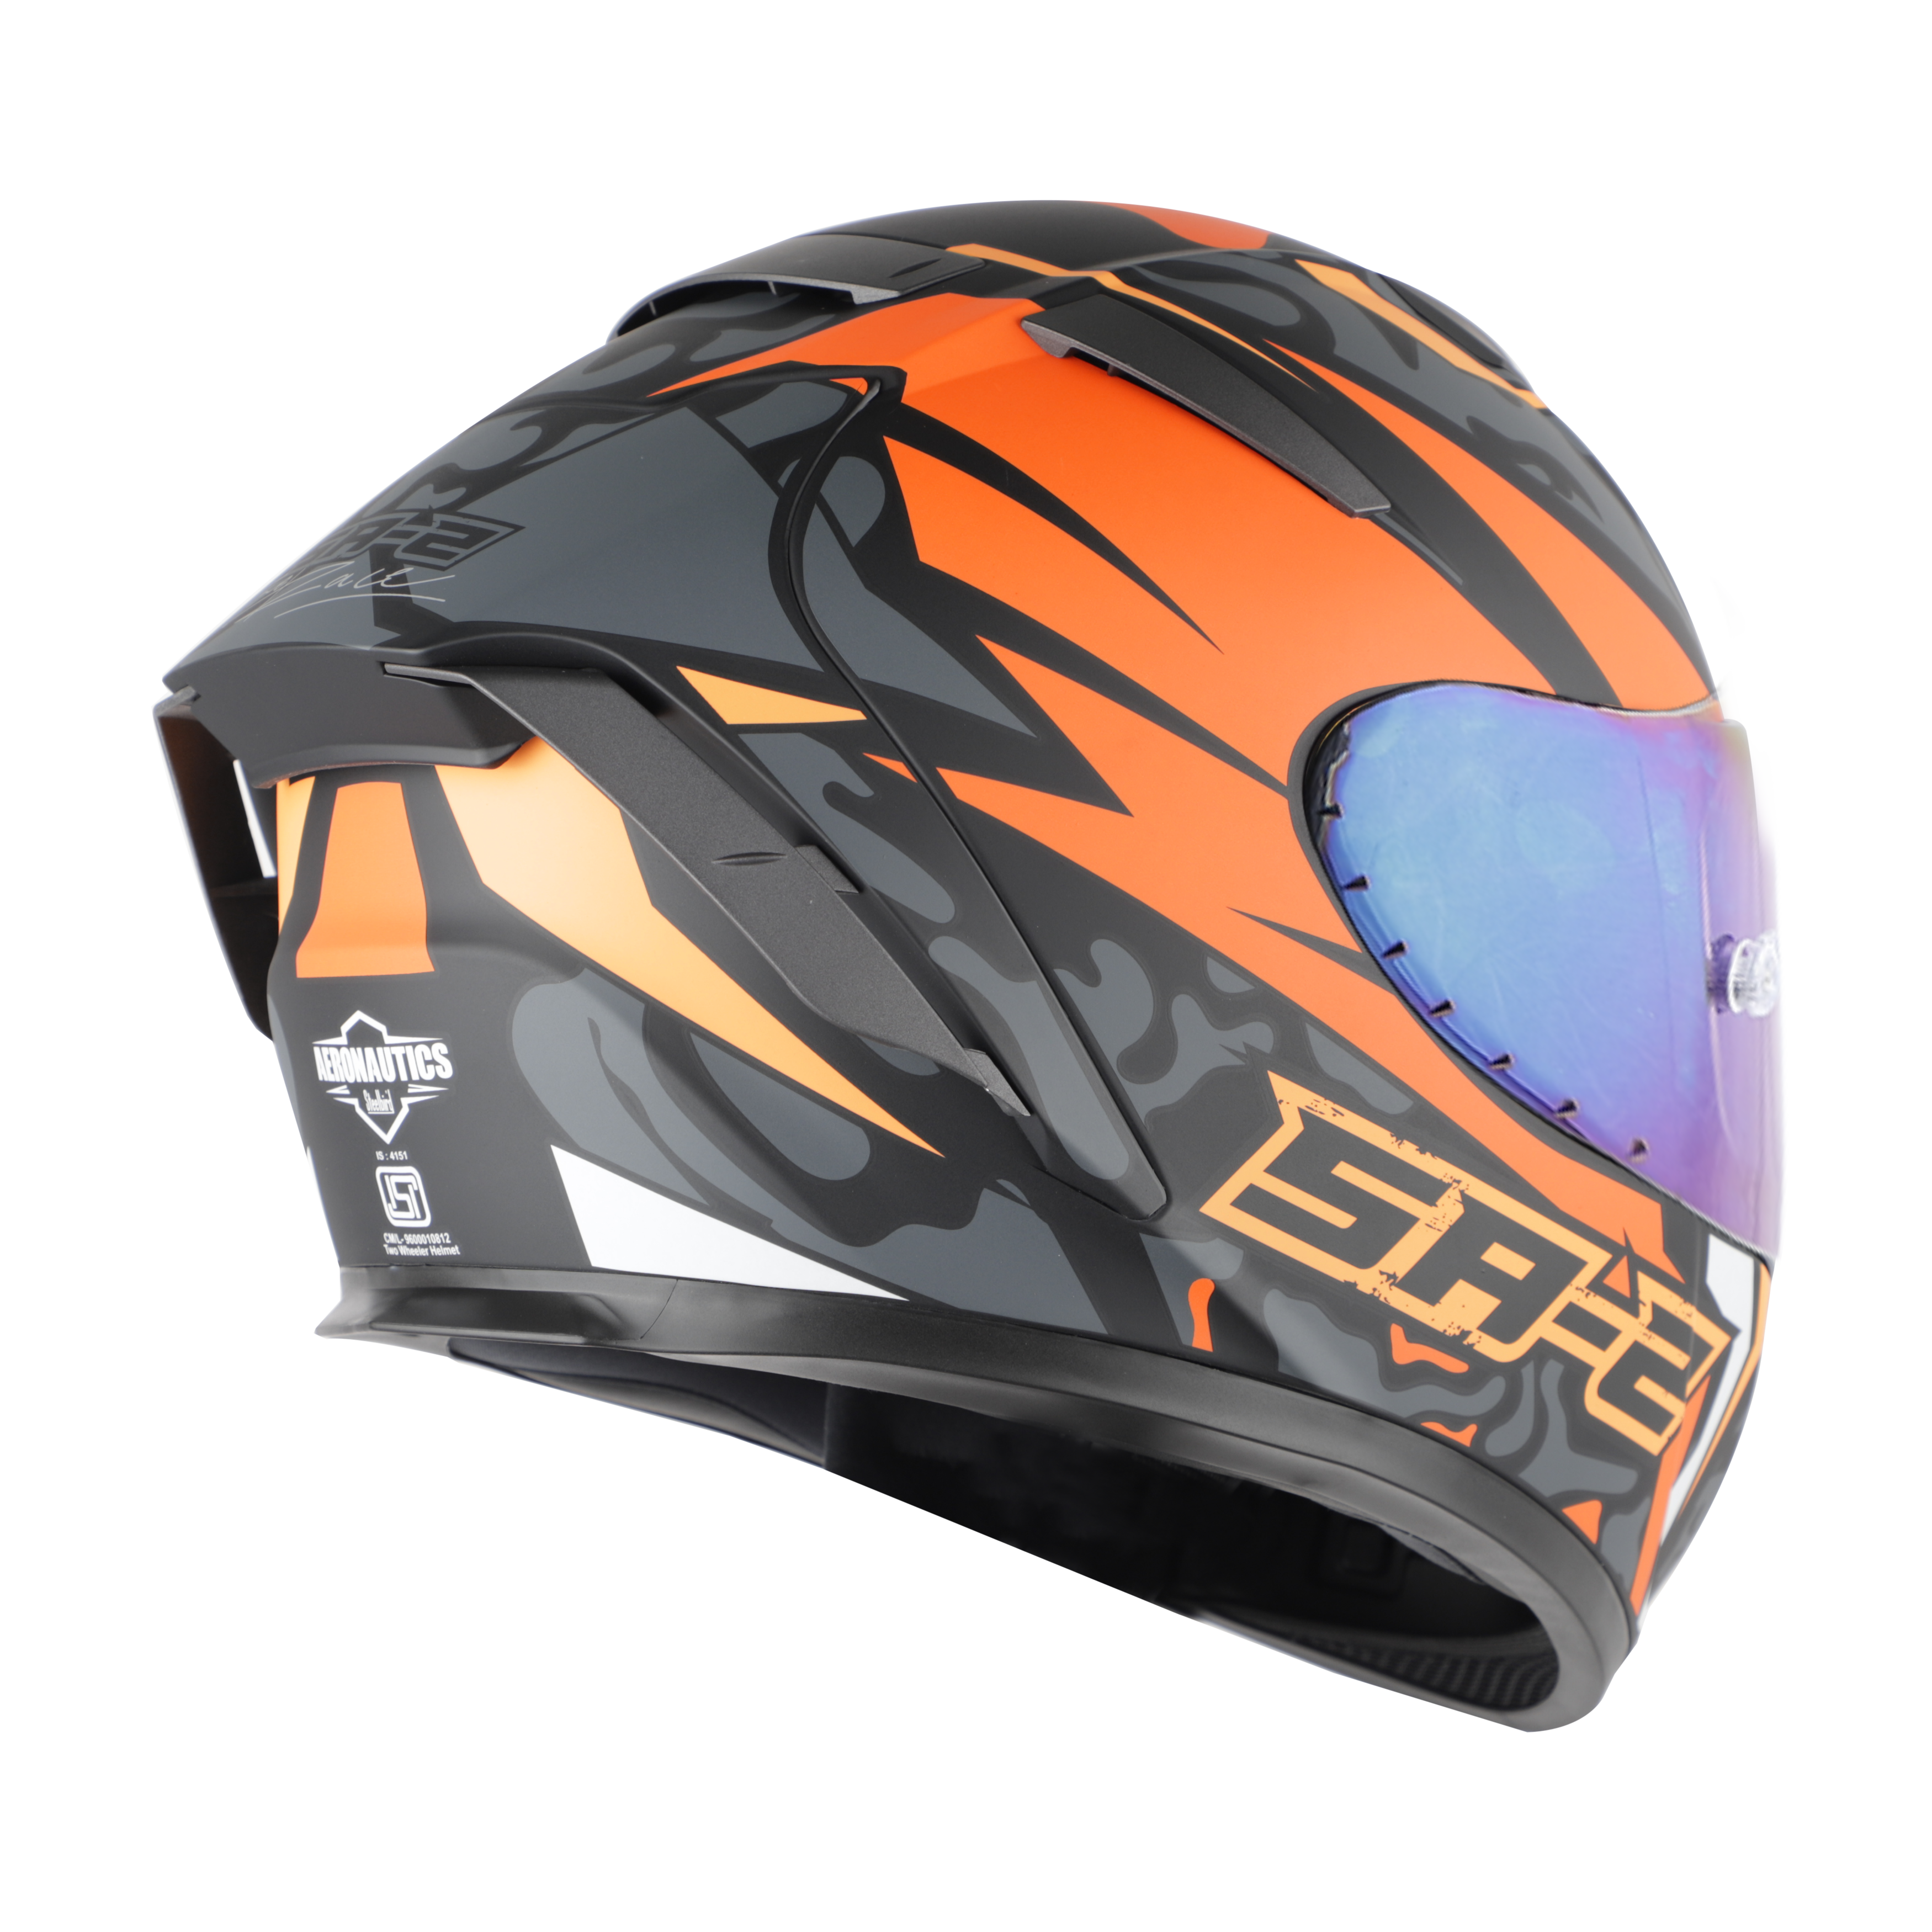 SA-2 TERMINATOR 3.0 MAT BLACK WITH ORANGE FITTED WITH CLEAR VISOR EXTRA RAINBOW CHROME VISOR FREE (WITH ANTI-FOR SHIELD HOLDER)